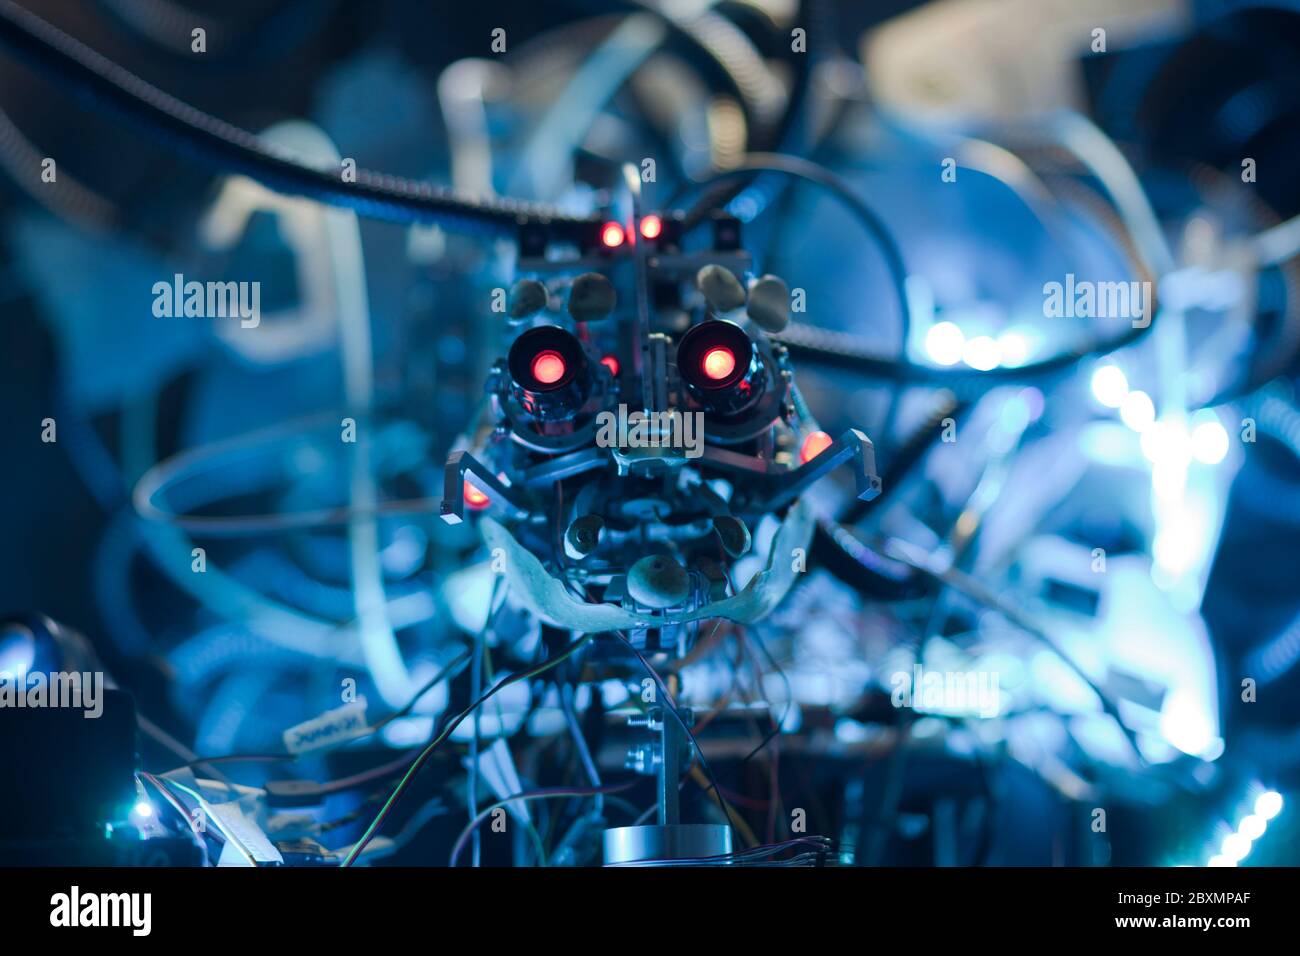 Cyborg head with red eyes surrounded by wires and lights in a futuristic cyberpunk enviroment Stock Photo